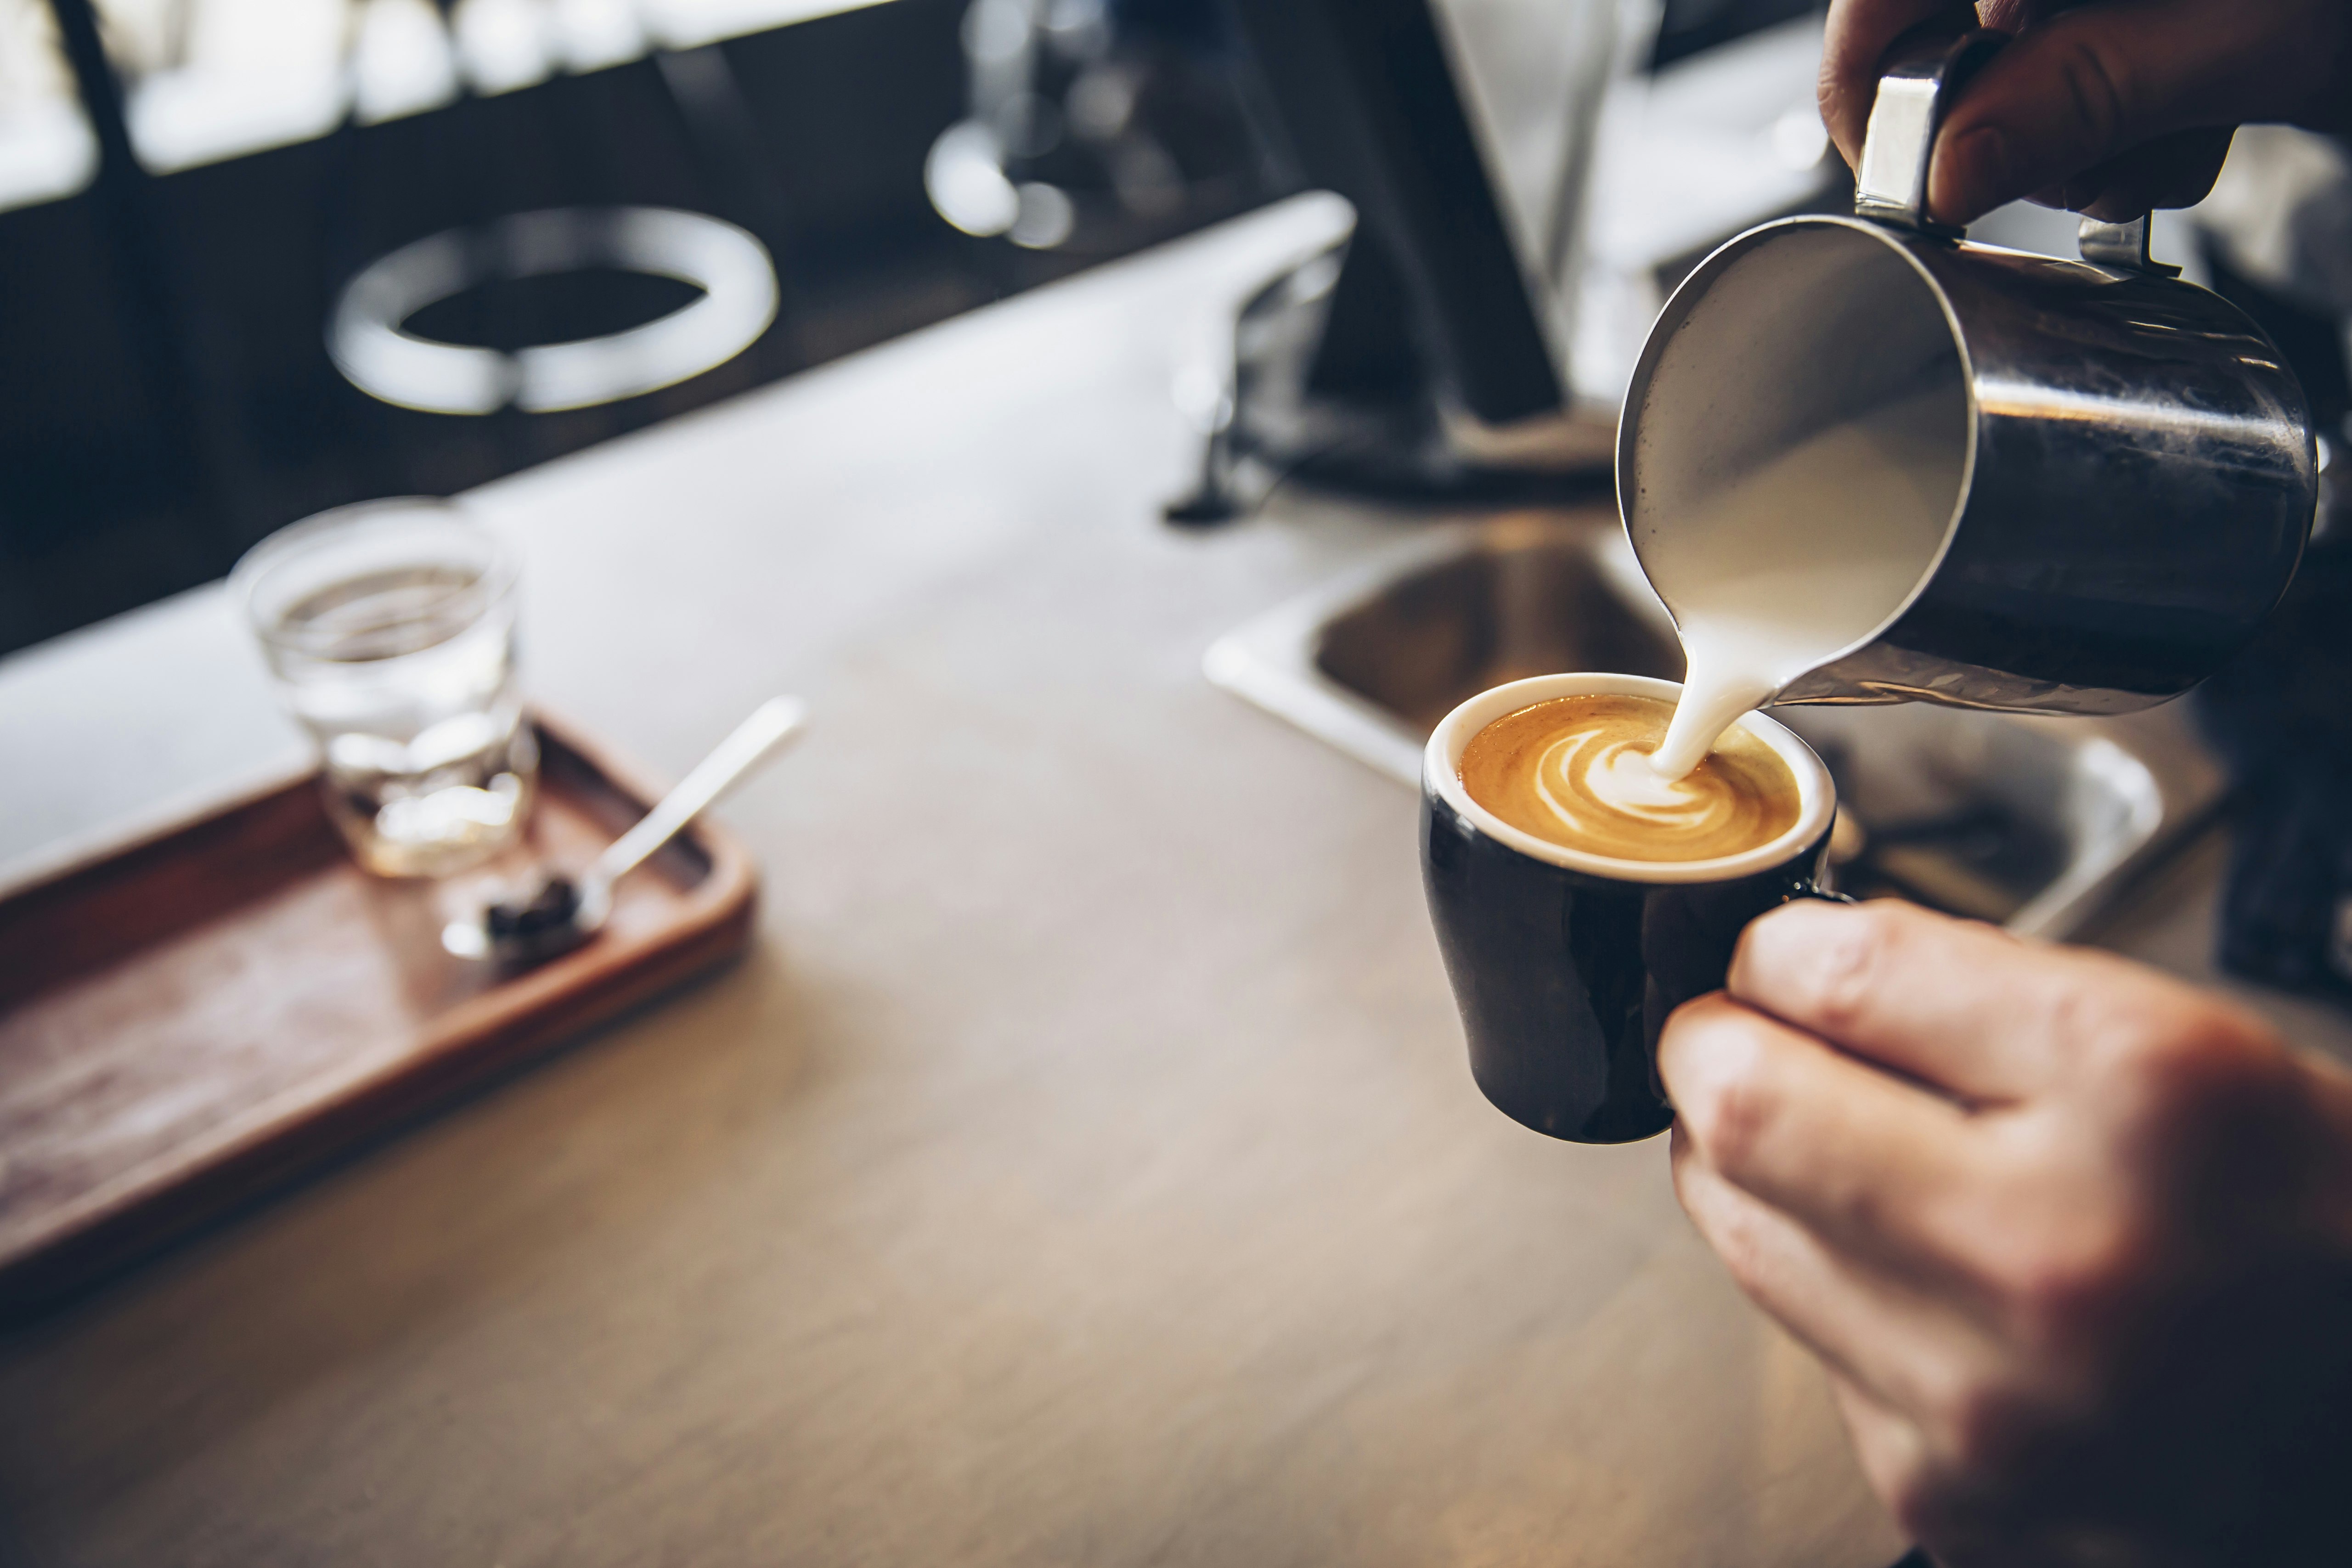 A close-up shot of a barista pouring milk into a small coffee cup over a wooden counter top.